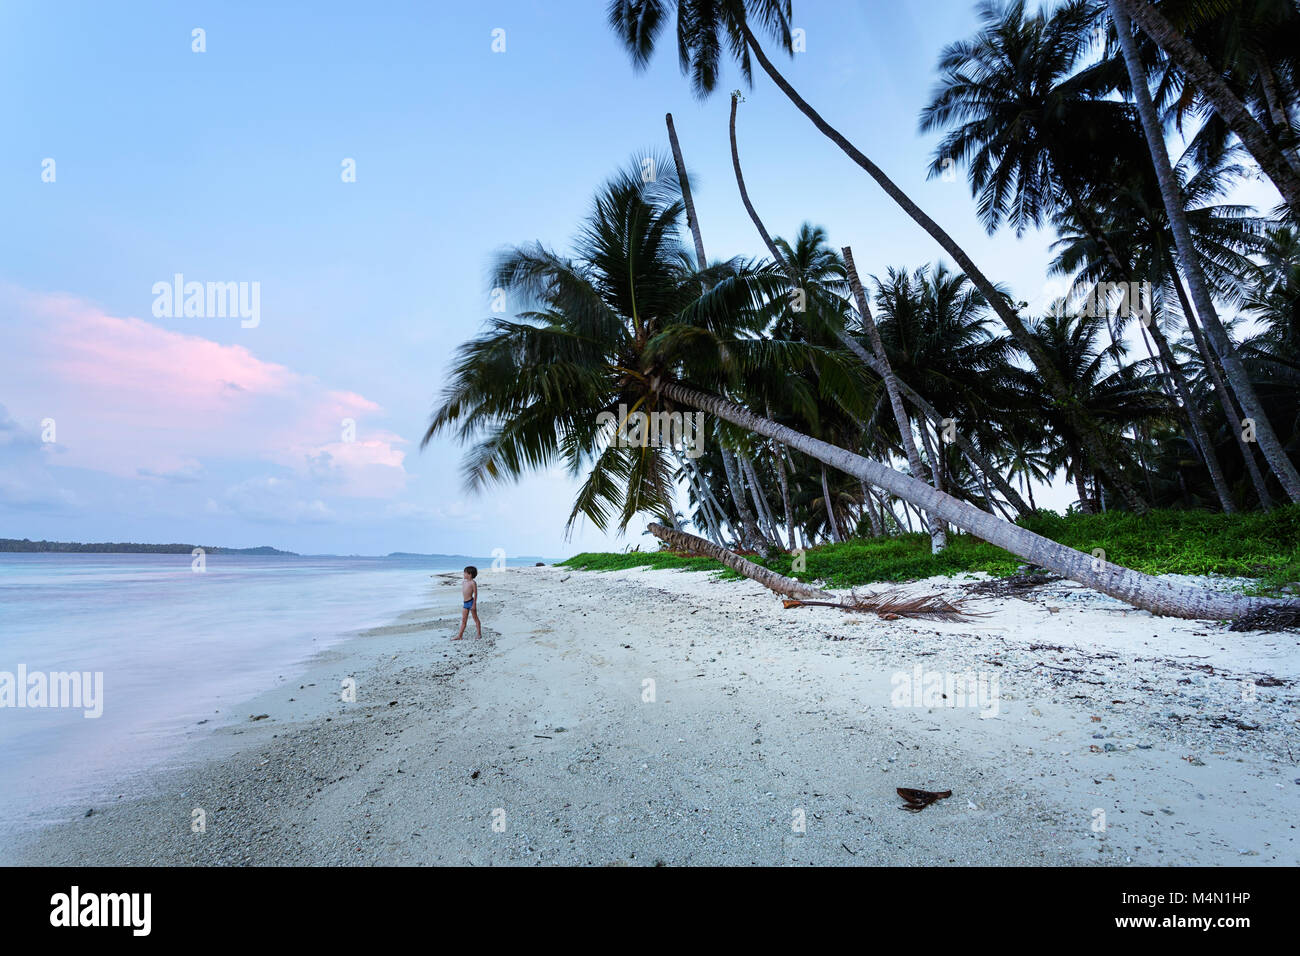 Young western boy standing on a beautiful tropical beach under palm ...